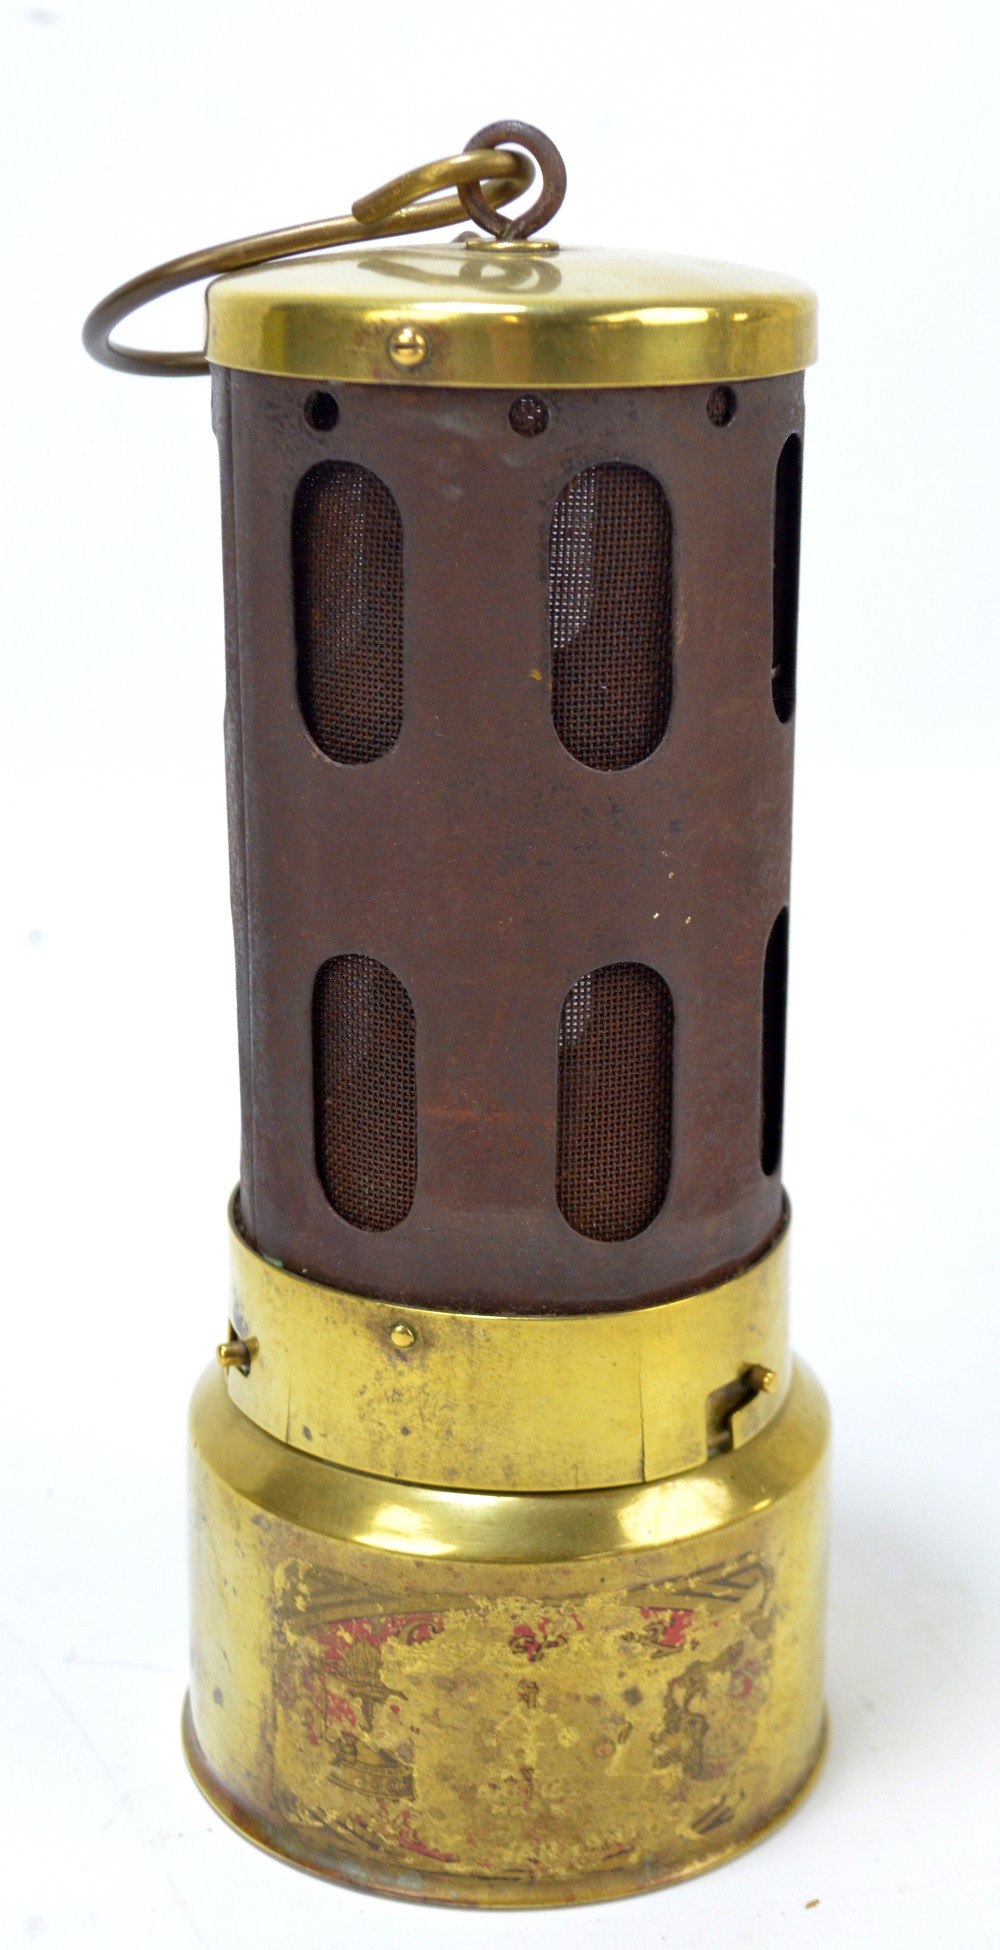 An early to mid-20th century car heater with traces of original decal decoration and indistinct